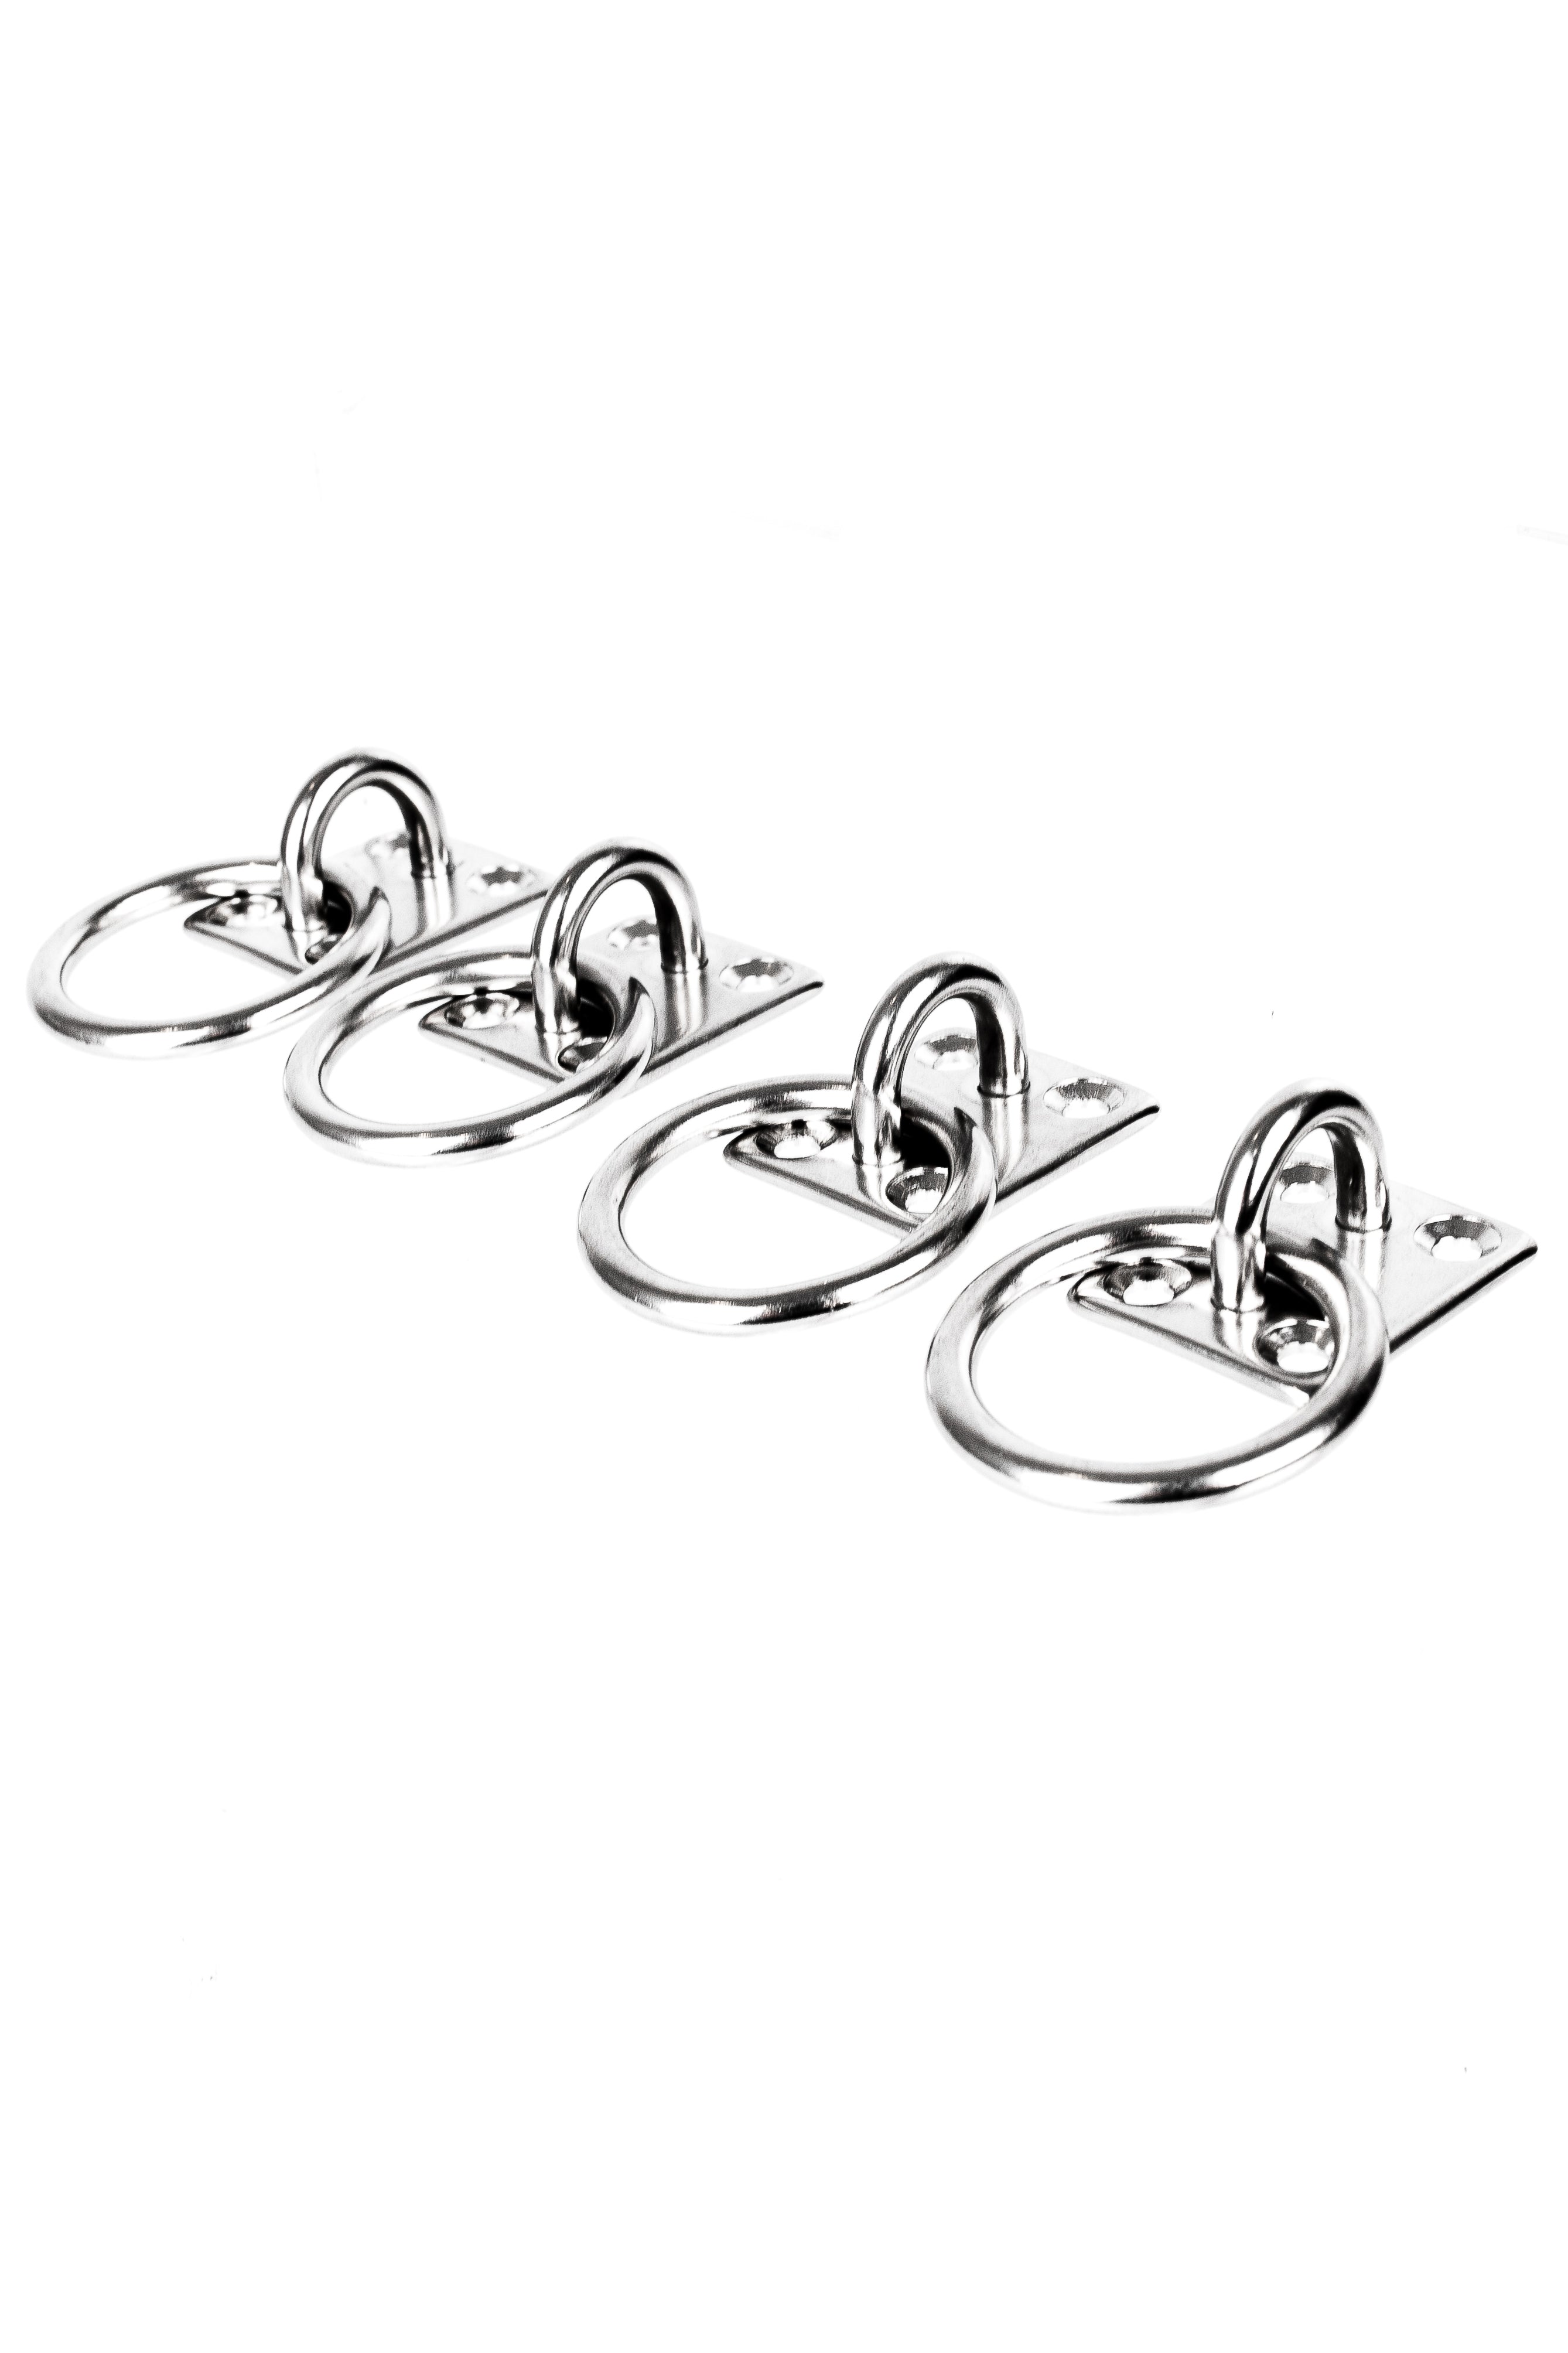 Set of 4 Hitching Rings with Plate